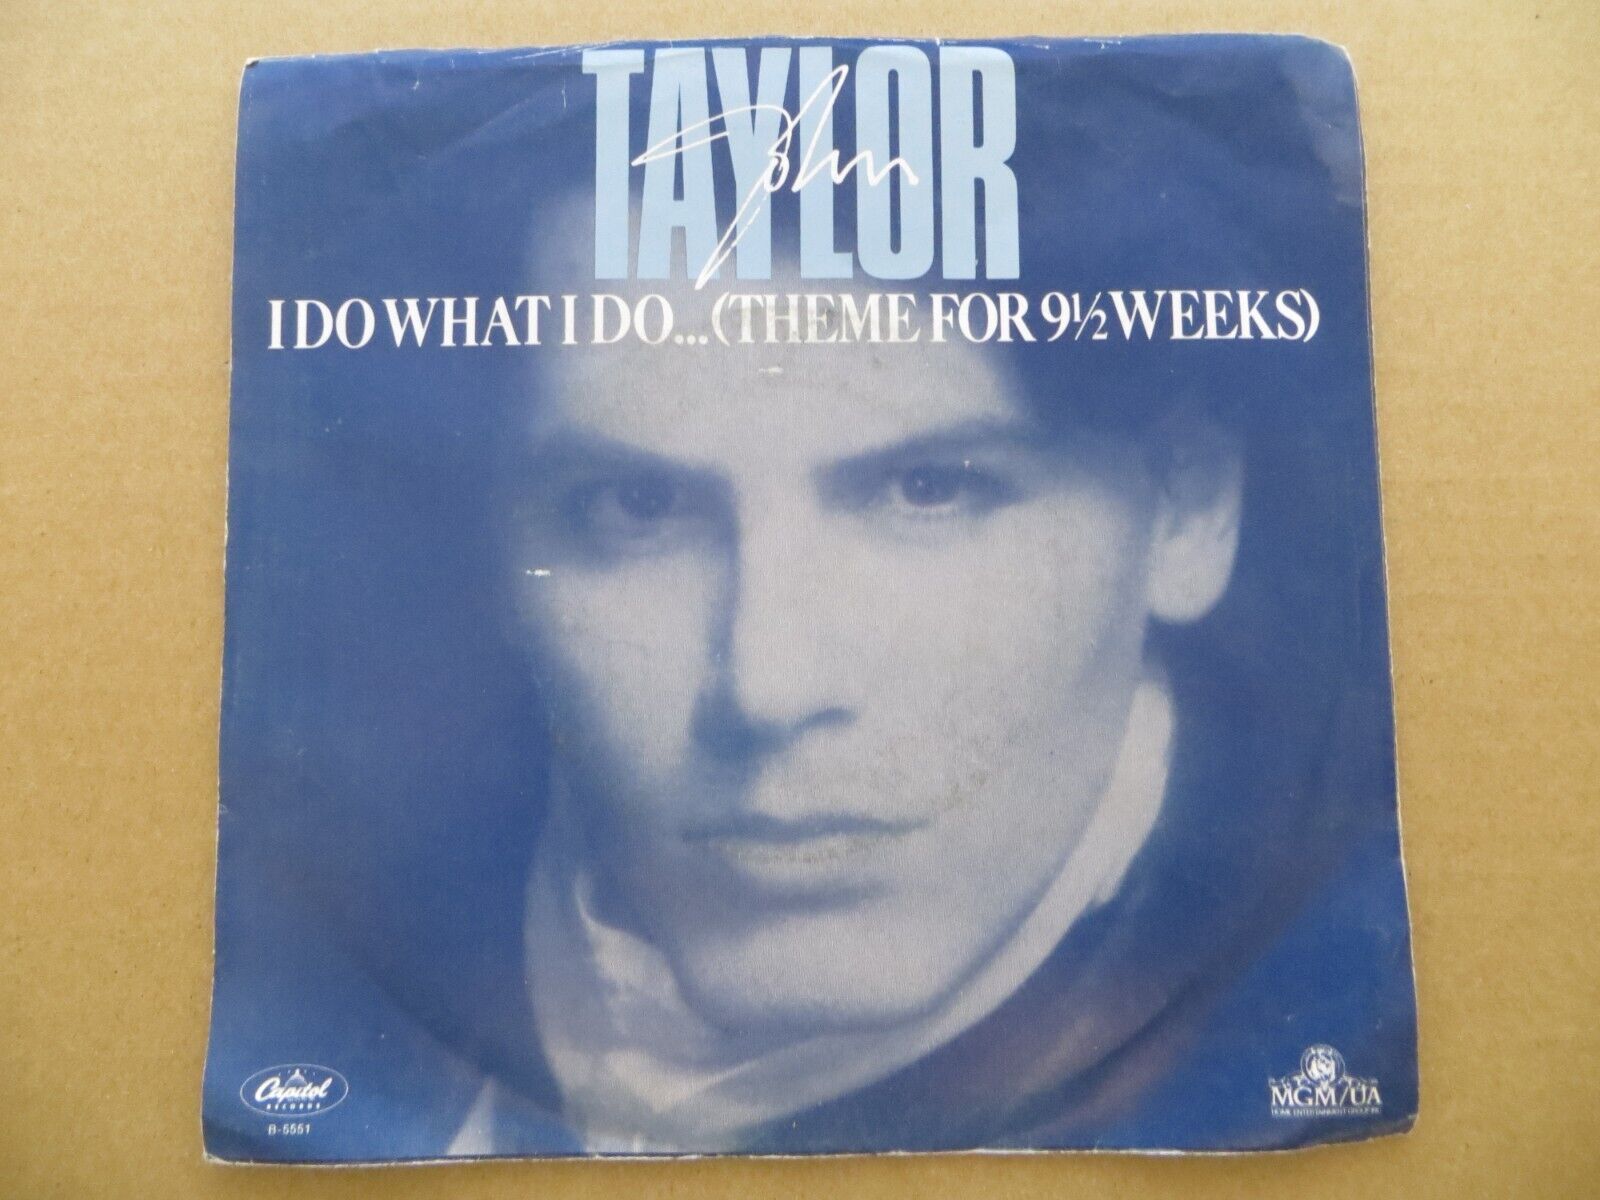 John Taylor – I Do What I Do... (Theme For 9½ Weeks) - 1986 Capitol B-5551 7\